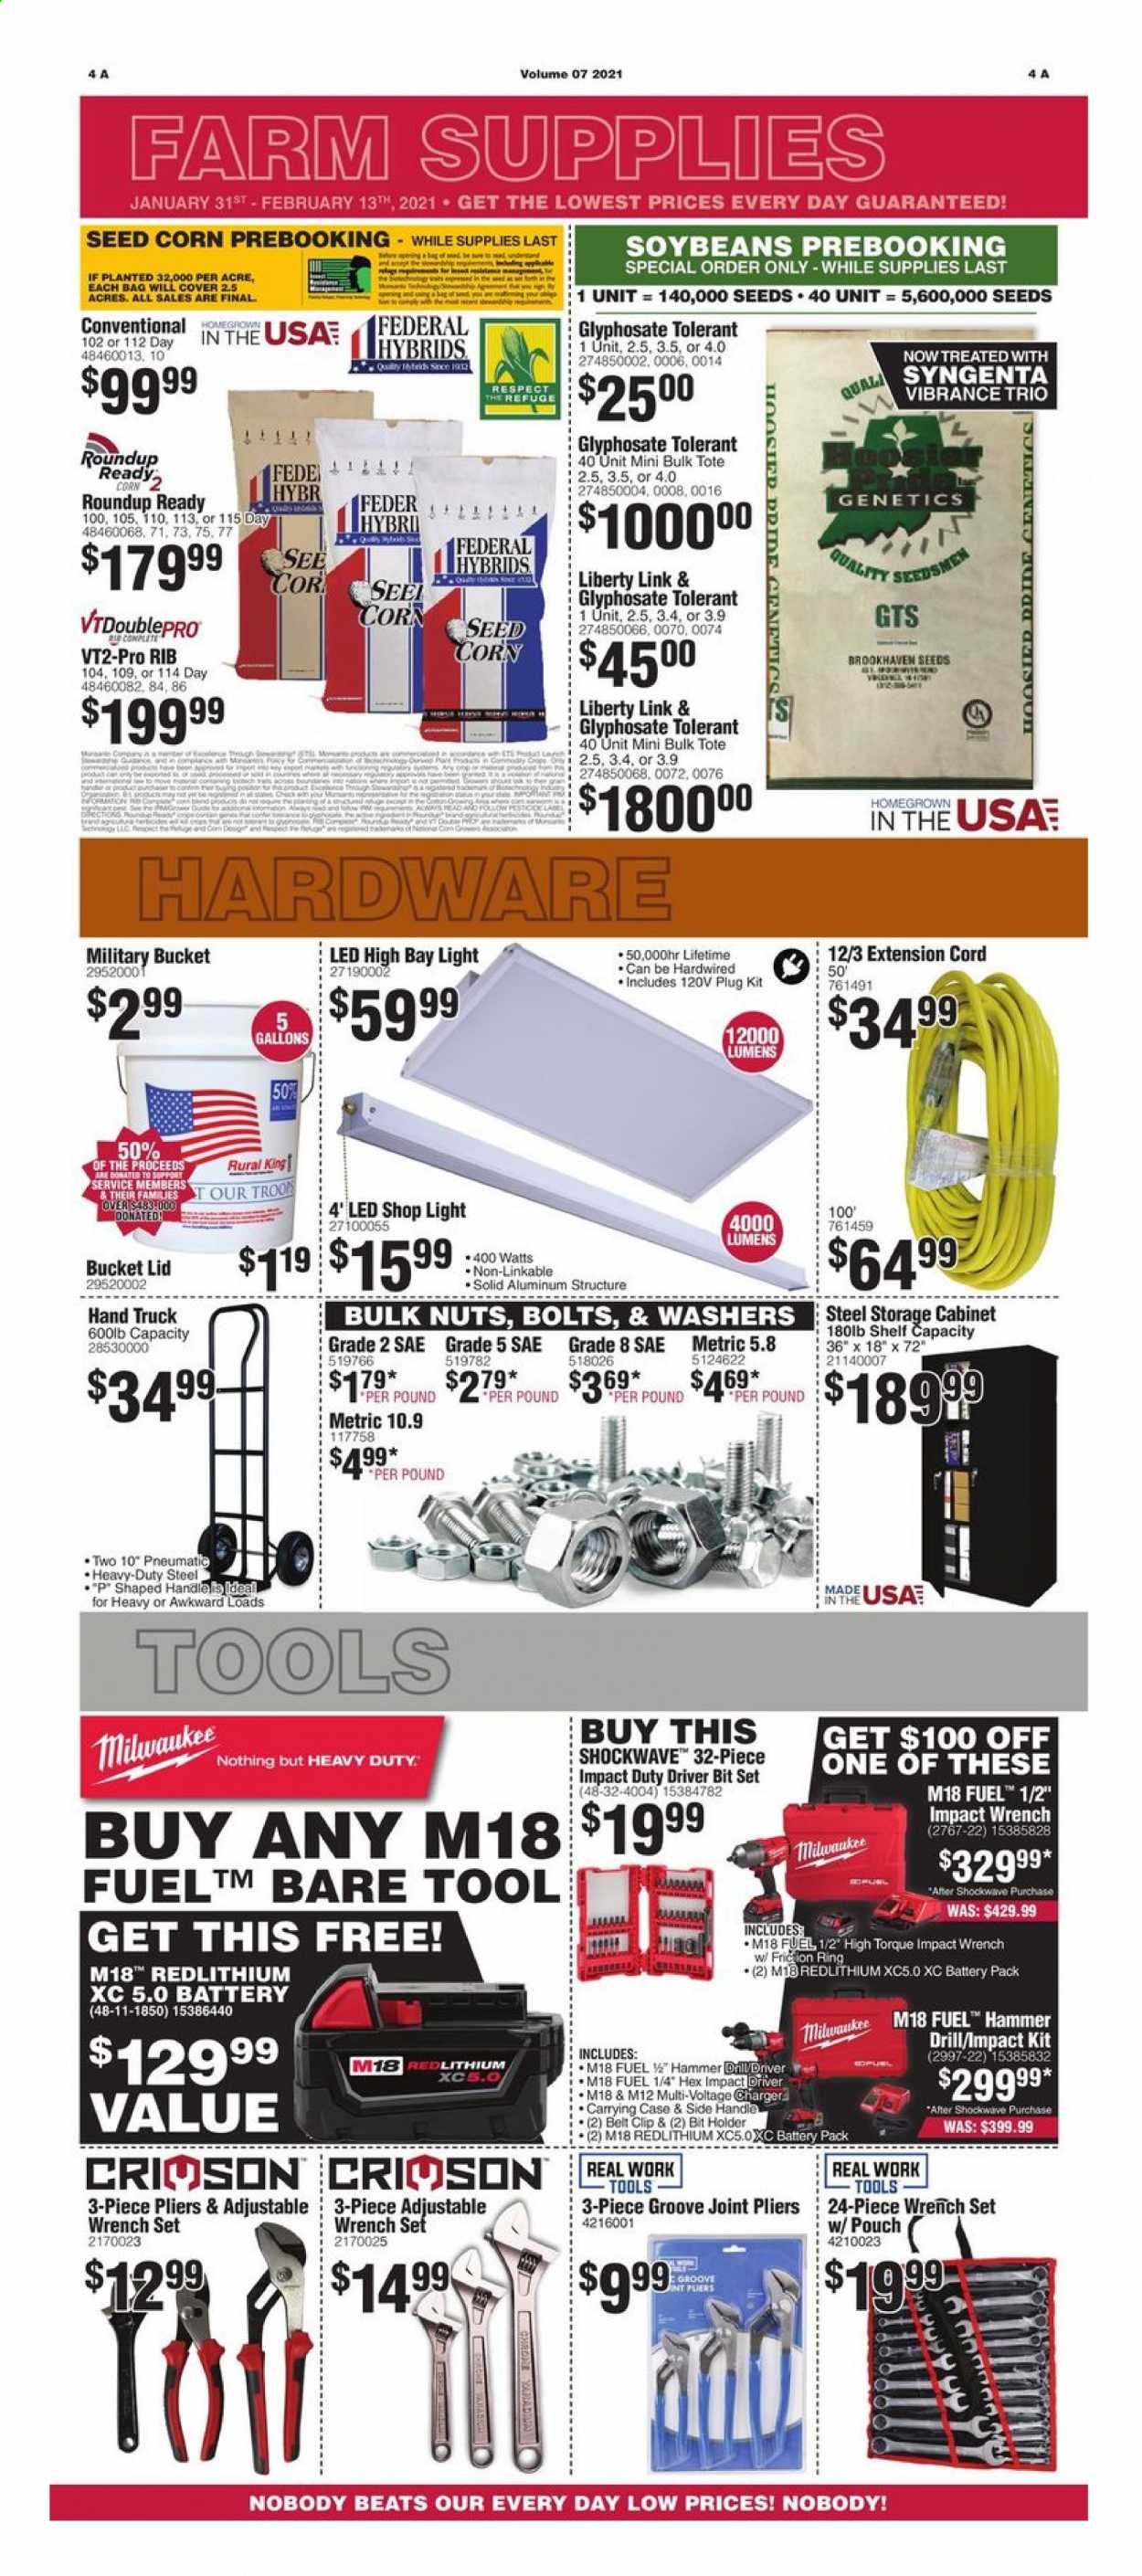 thumbnail - Rural King Flyer - 01/31/2021 - 02/13/2021 - Sales products - corn, military bucket, lid, battery, Beats, bag, tote, belt, shop light, Milwaukee, drill, impact driver, hammer, pliers, wrench, wrench set, extension cord, hand truck, washers, tool cabinets, plant seeds, glyphosate tolerant, Roundup. Page 4.